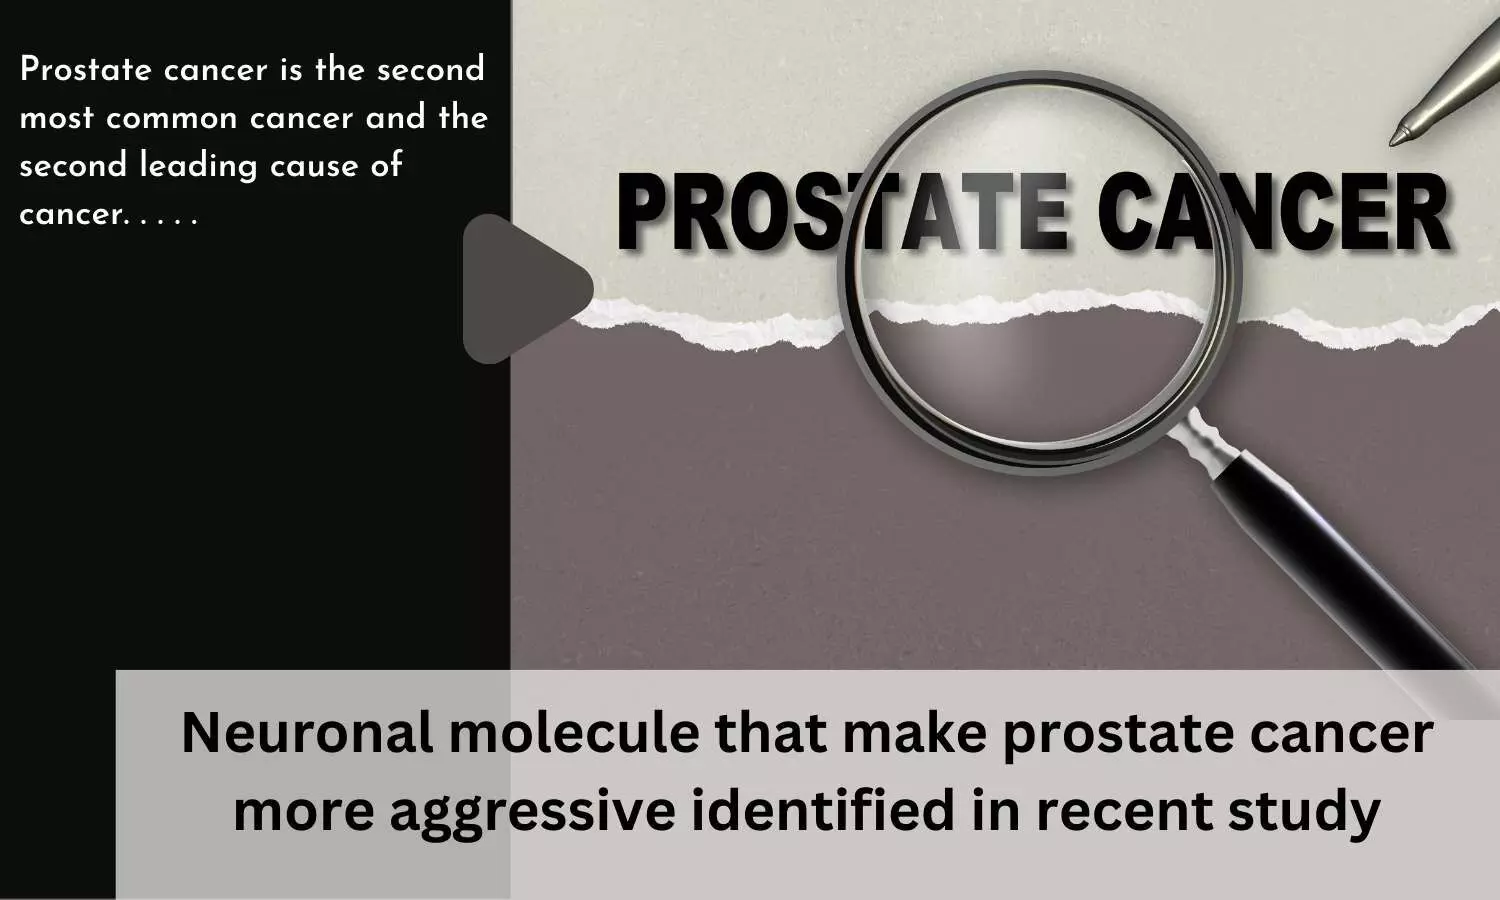 Neuronal molecule that make prostate cancer more aggressive identified in recent study